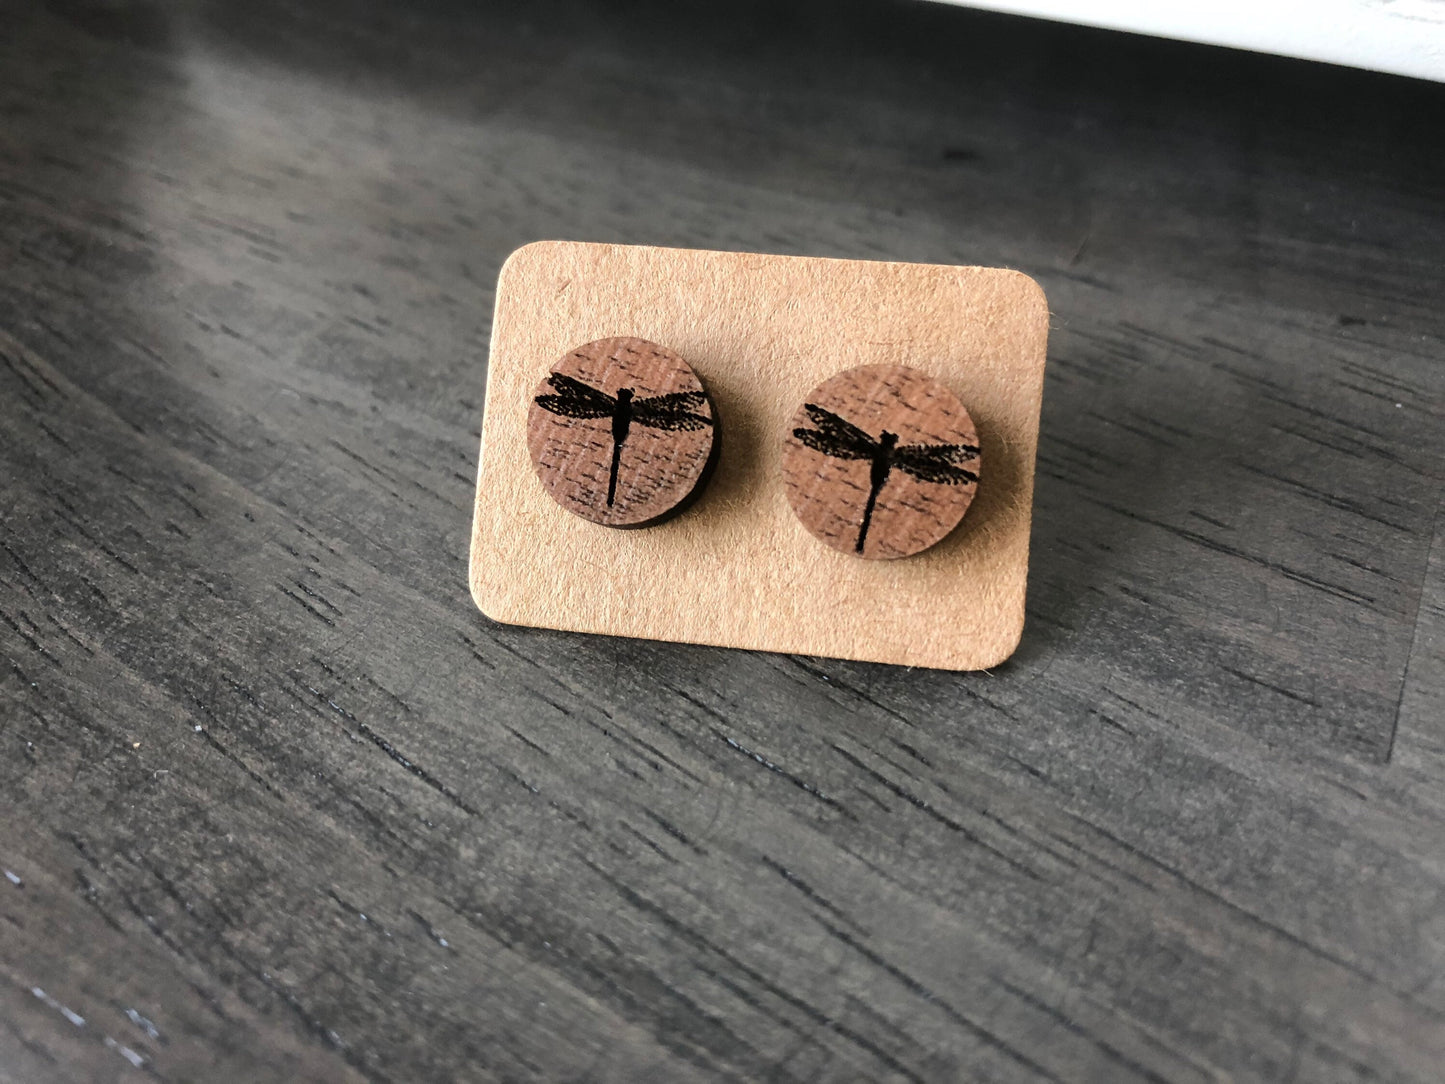 Dragonfly Engraved Wood Studs. Mother’s Day Gift. Gift for Mom. Dragonflies. Gift for Her. Post Earrings.